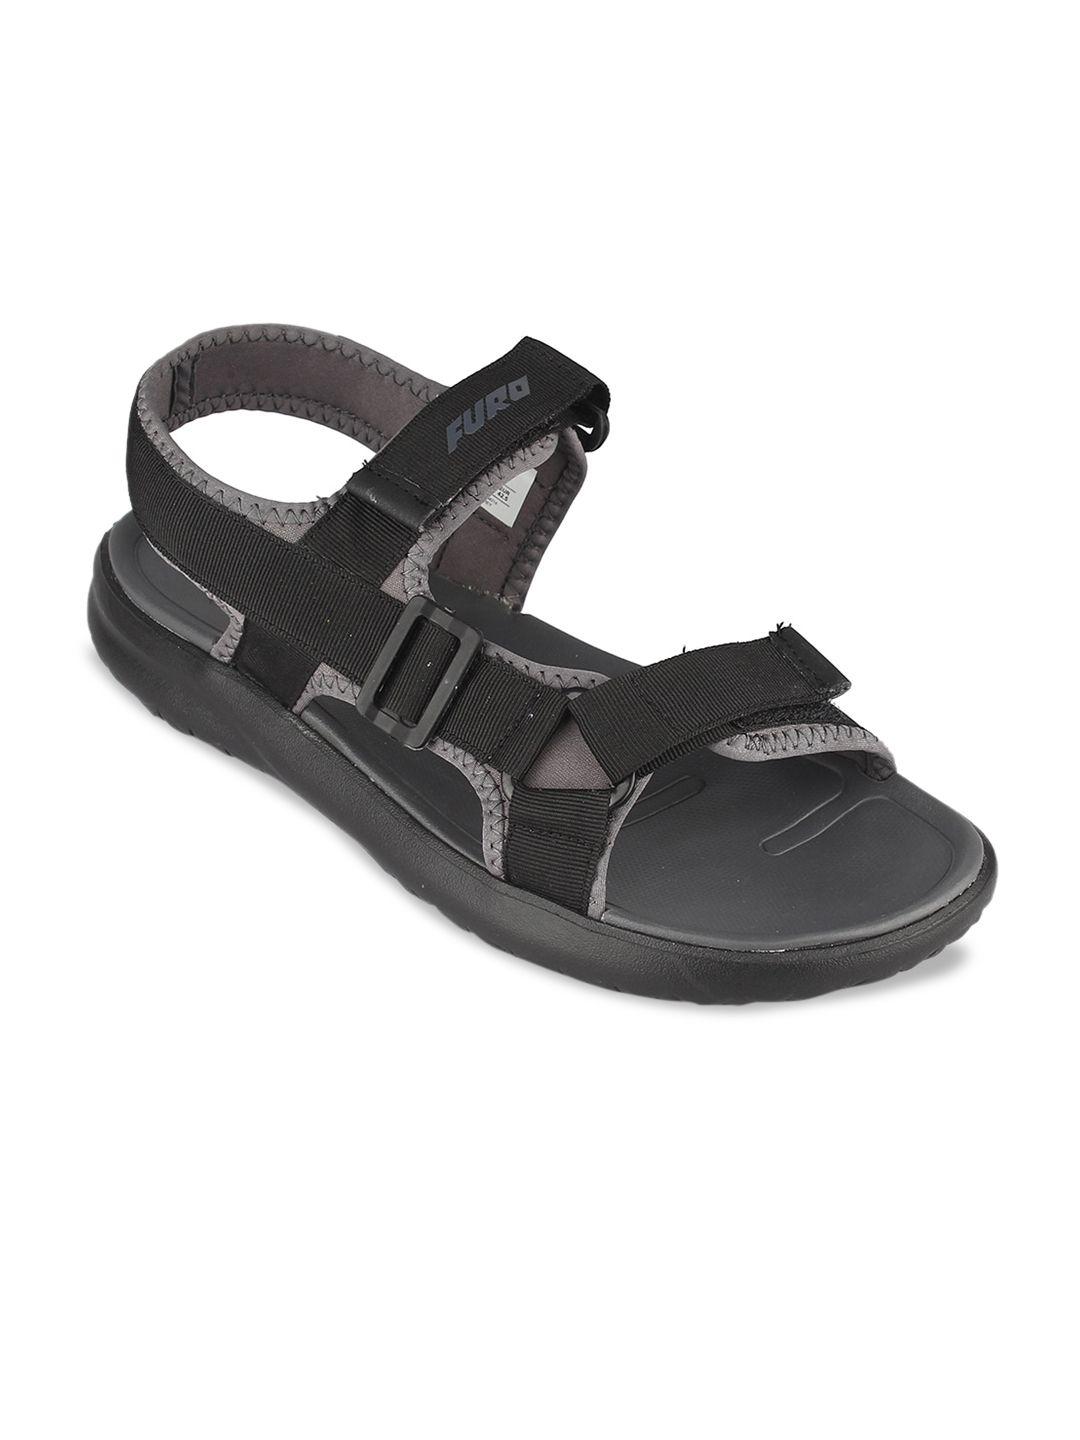 FURO by Red Chief Men Black & Grey Solid Sports Sandals